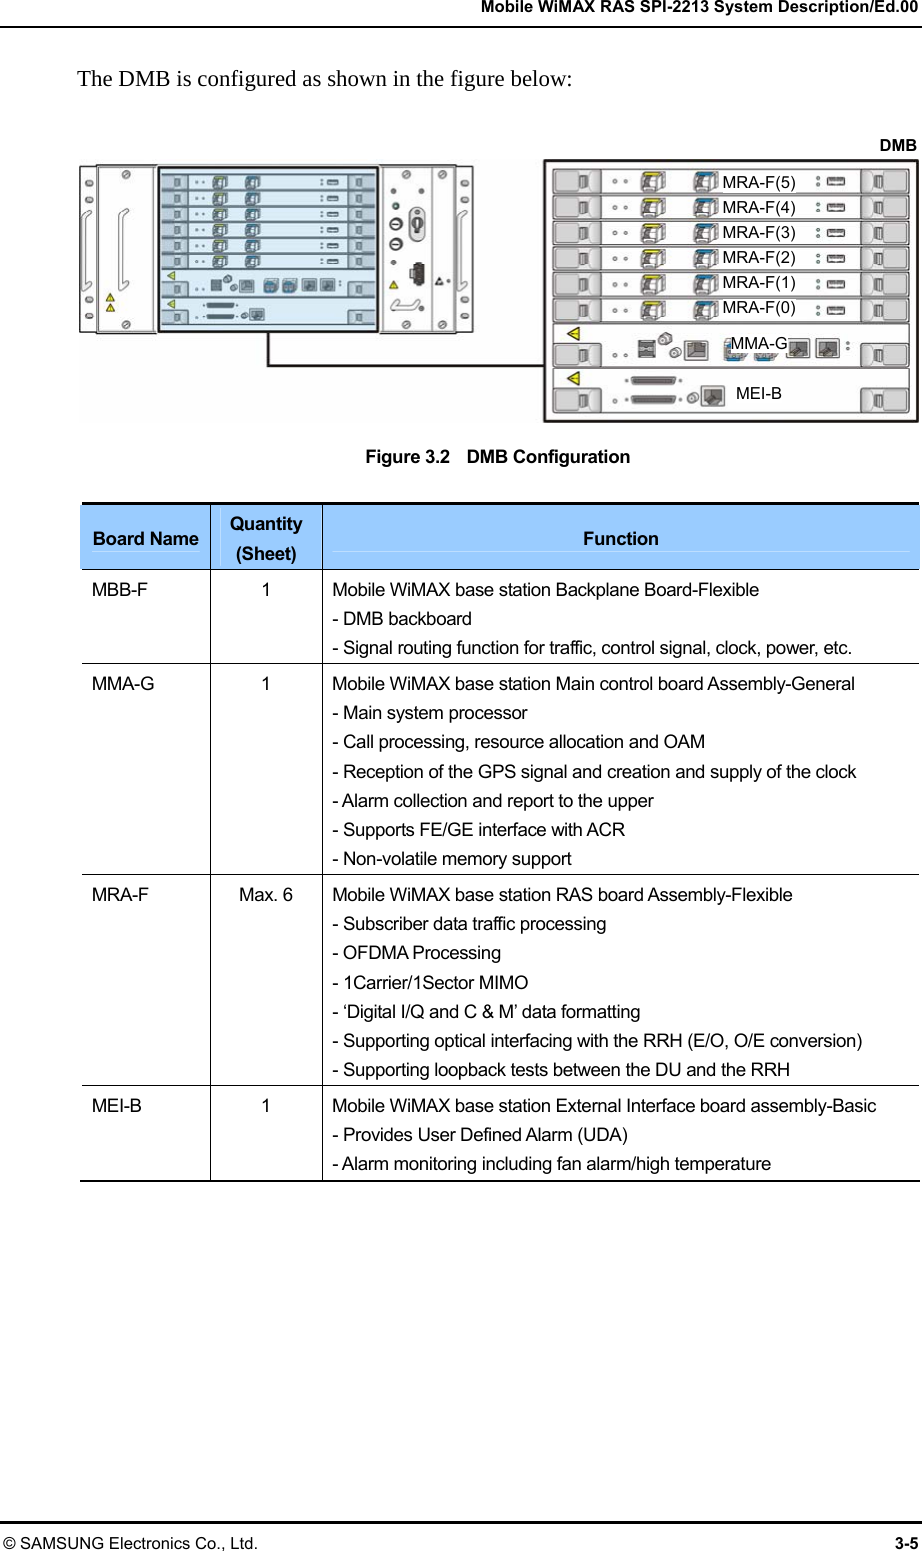   Mobile WiMAX RAS SPI-2213 System Description/Ed.00 © SAMSUNG Electronics Co., Ltd.  3-5 The DMB is configured as shown in the figure below:  Figure 3.2    DMB Configuration  Board Name Quantity (Sheet)  Function MBB-F  1  Mobile WiMAX base station Backplane Board-Flexible - DMB backboard - Signal routing function for traffic, control signal, clock, power, etc. MMA-G  1  Mobile WiMAX base station Main control board Assembly-General - Main system processor - Call processing, resource allocation and OAM - Reception of the GPS signal and creation and supply of the clock - Alarm collection and report to the upper - Supports FE/GE interface with ACR - Non-volatile memory support MRA-F  Max. 6  Mobile WiMAX base station RAS board Assembly-Flexible - Subscriber data traffic processing - OFDMA Processing - 1Carrier/1Sector MIMO - ‘Digital I/Q and C &amp; M’ data formatting - Supporting optical interfacing with the RRH (E/O, O/E conversion) - Supporting loopback tests between the DU and the RRH MEI-B  1  Mobile WiMAX base station External Interface board assembly-Basic - Provides User Defined Alarm (UDA) - Alarm monitoring including fan alarm/high temperature DMBMRA-F(5) MRA-F(4) MRA-F(3) MRA-F(2) MRA-F(1) MRA-F(0)  MMA-G  MEI-B 